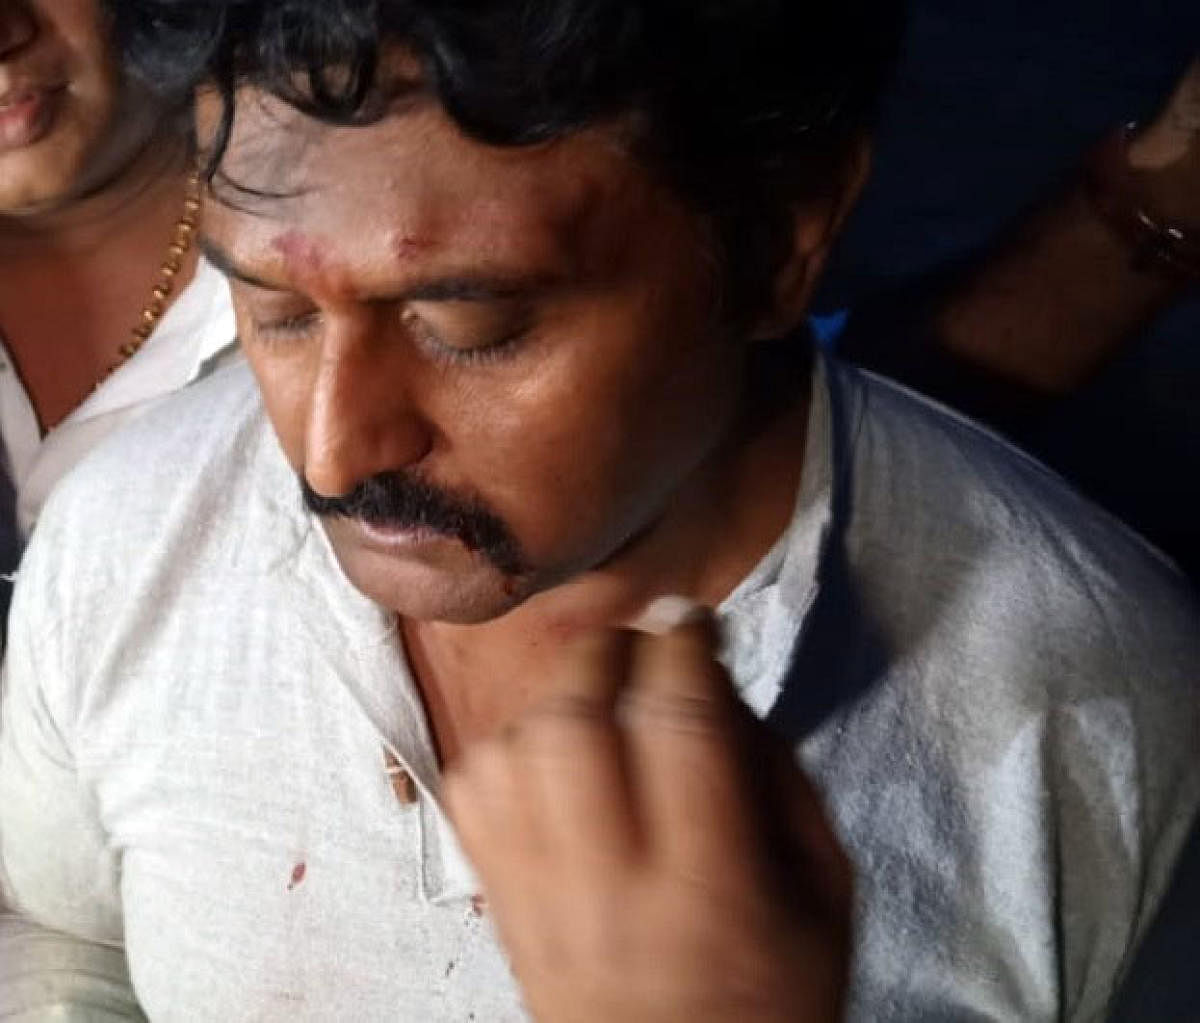 Actor Komal assaulted in road rage incident